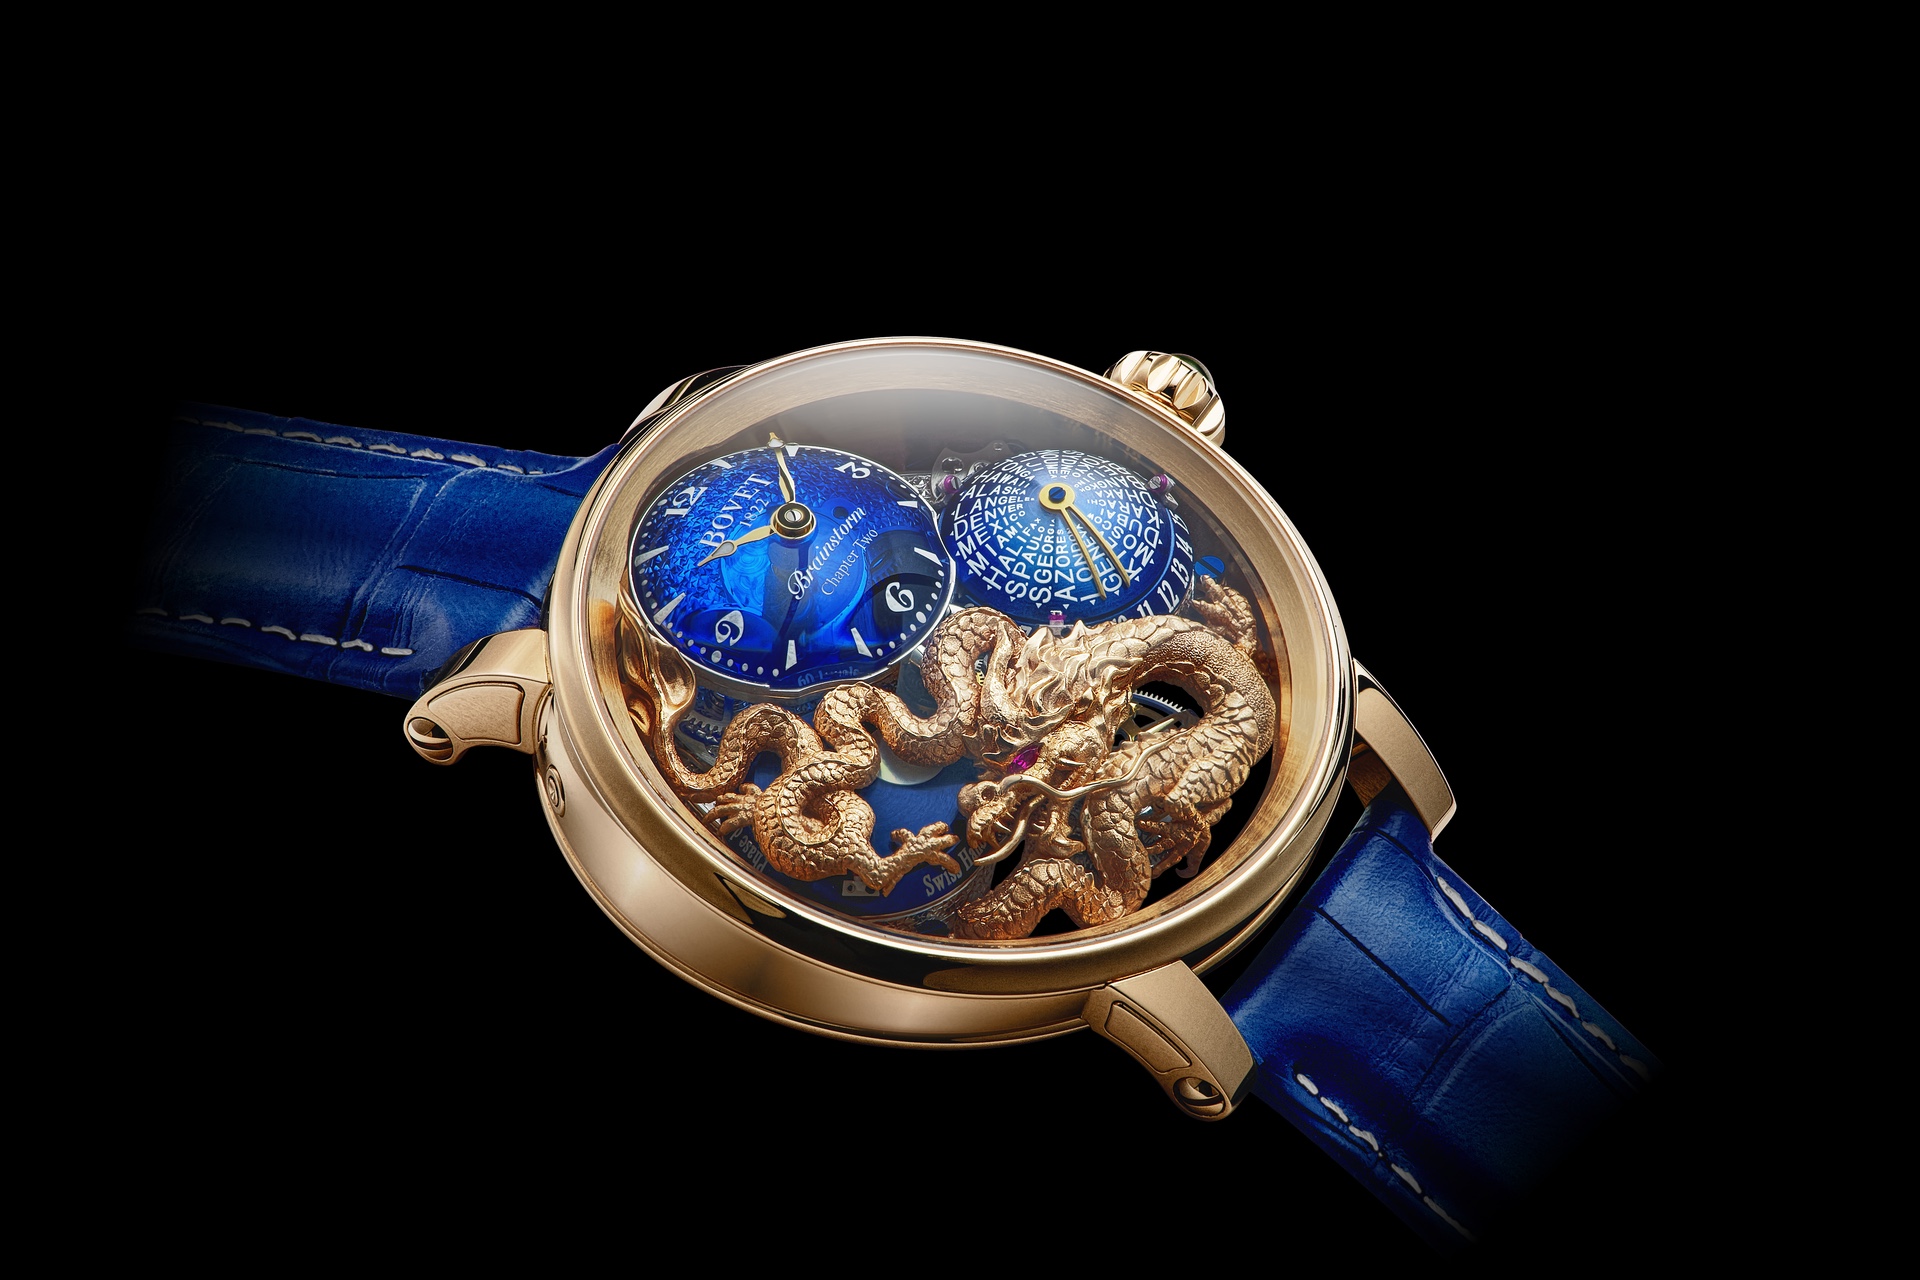 The BOVET Récital 26 Chapter Two Golden Dragon